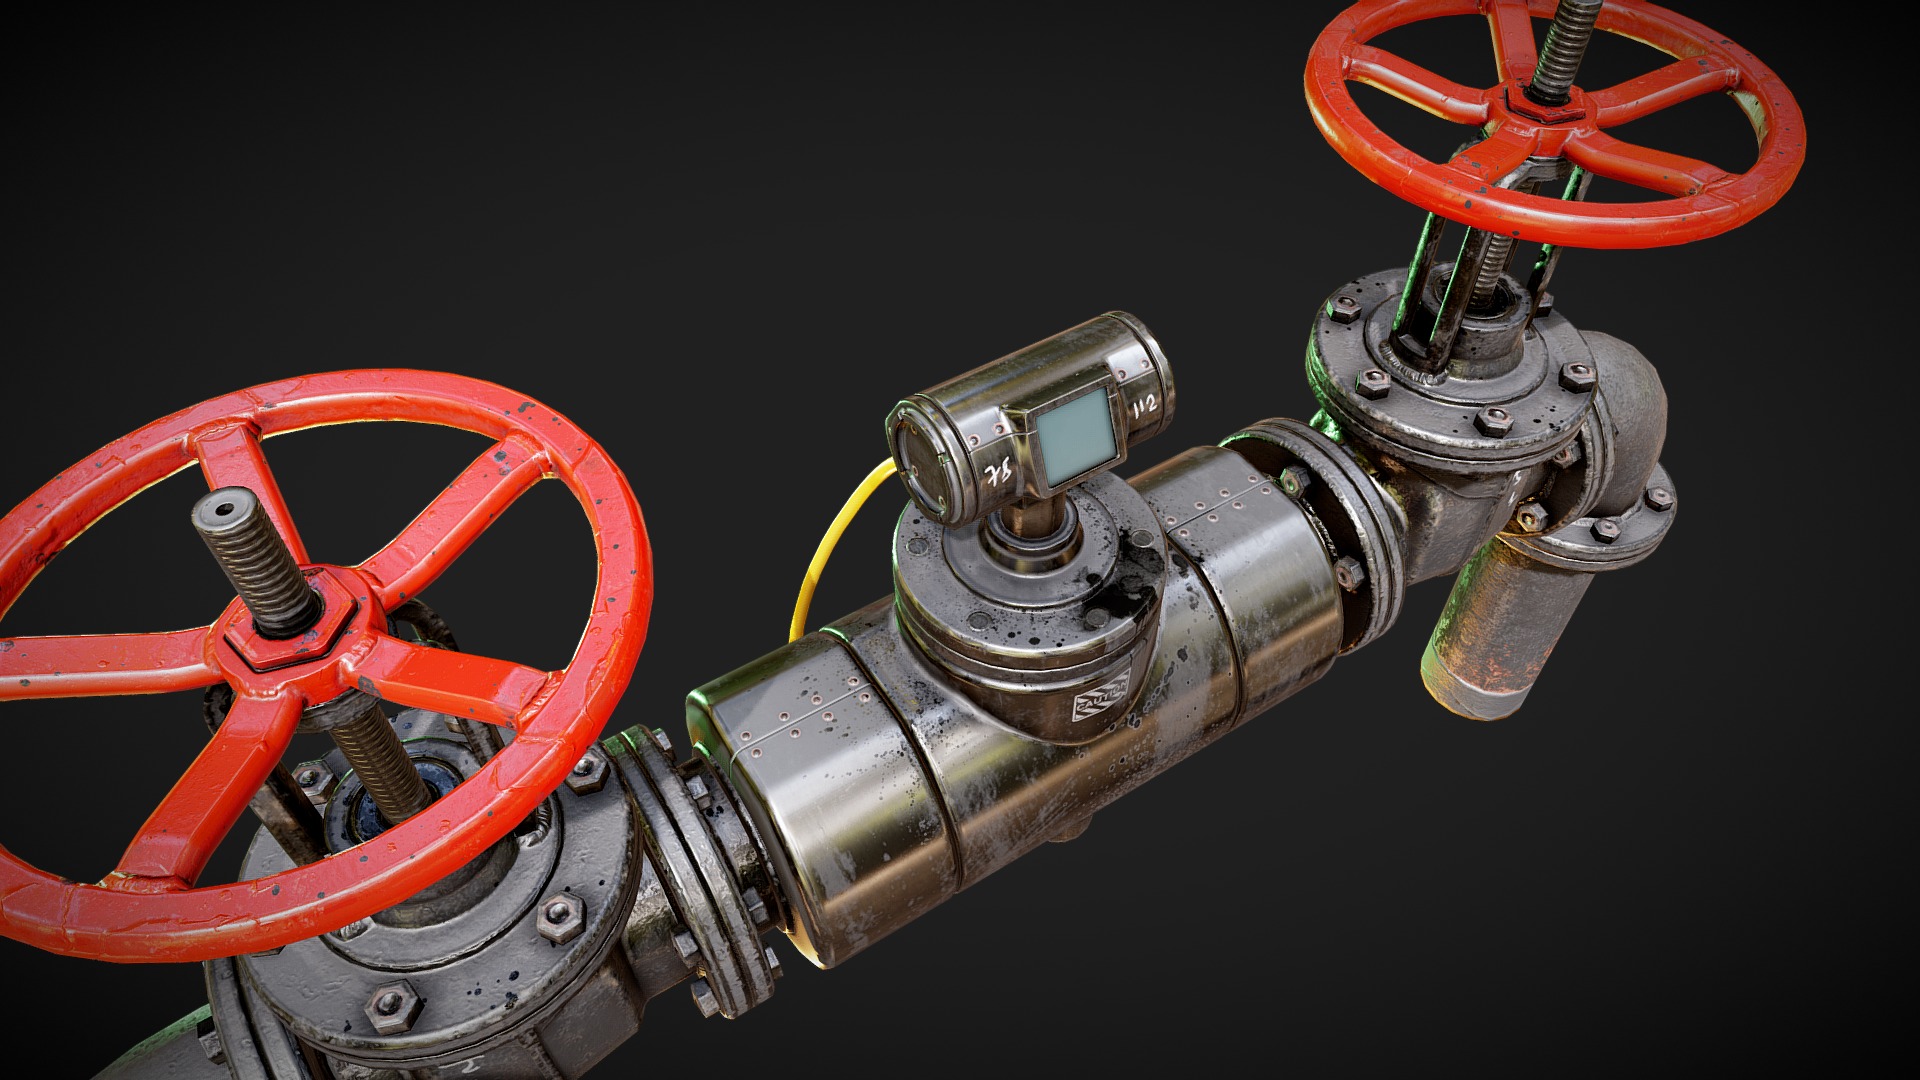 3D model Pipeline - This is a 3D model of the Pipeline. The 3D model is about a close-up of a fire hydrant.